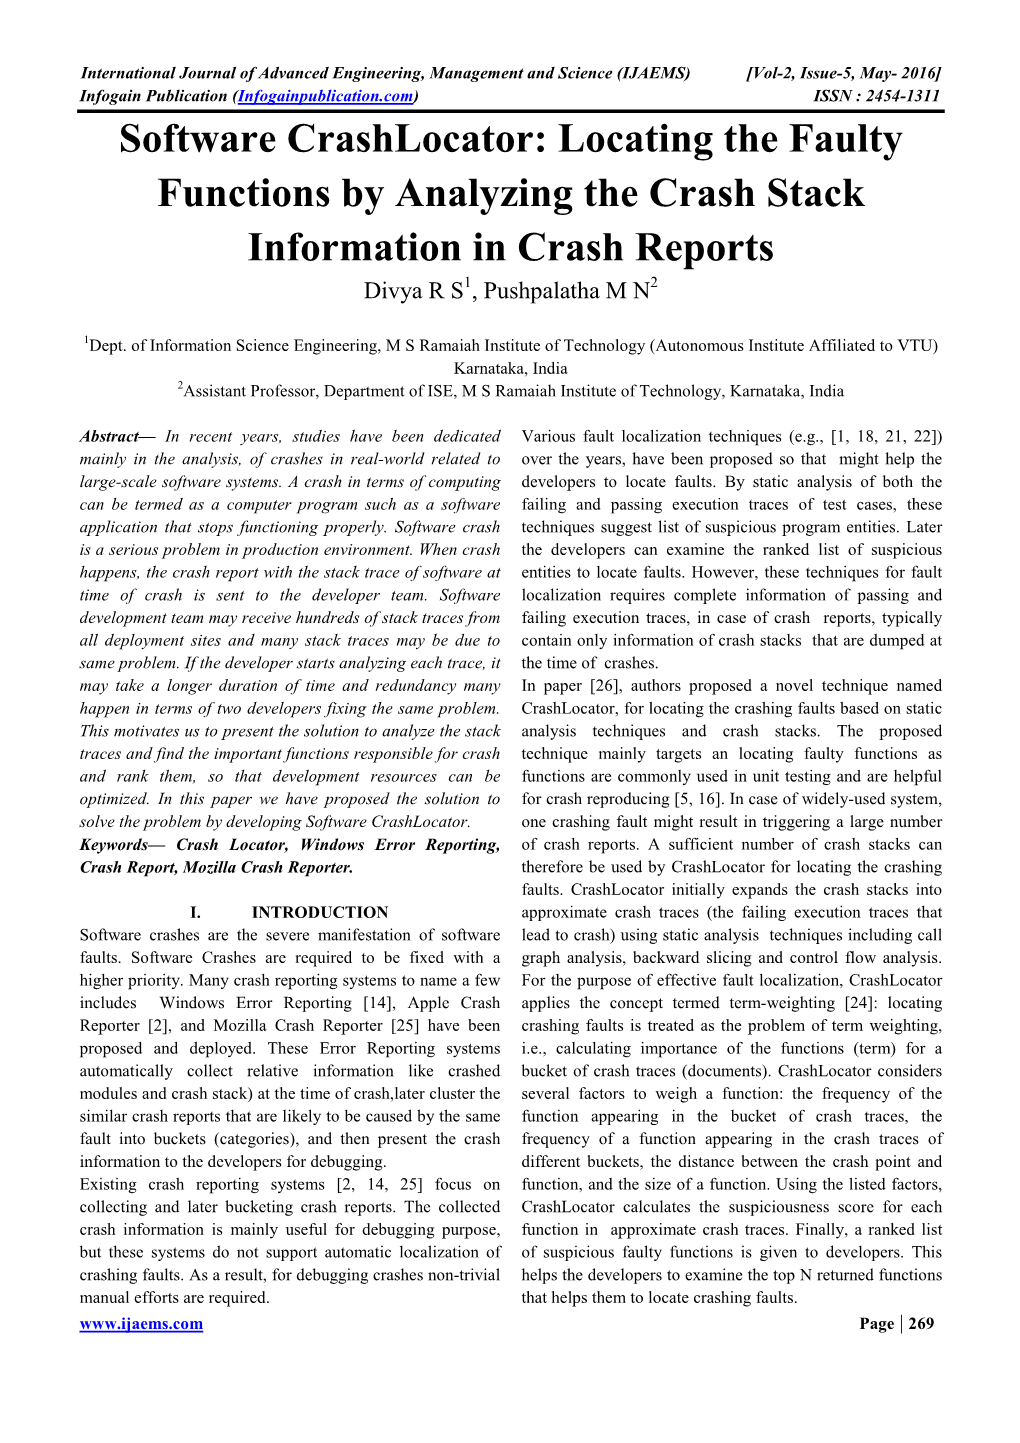 Software Crashlocator: Locating the Faulty Functions by Analyzing the Crash Stack Information in Crash Reports Divya R S 1, Pushpalatha M N 2